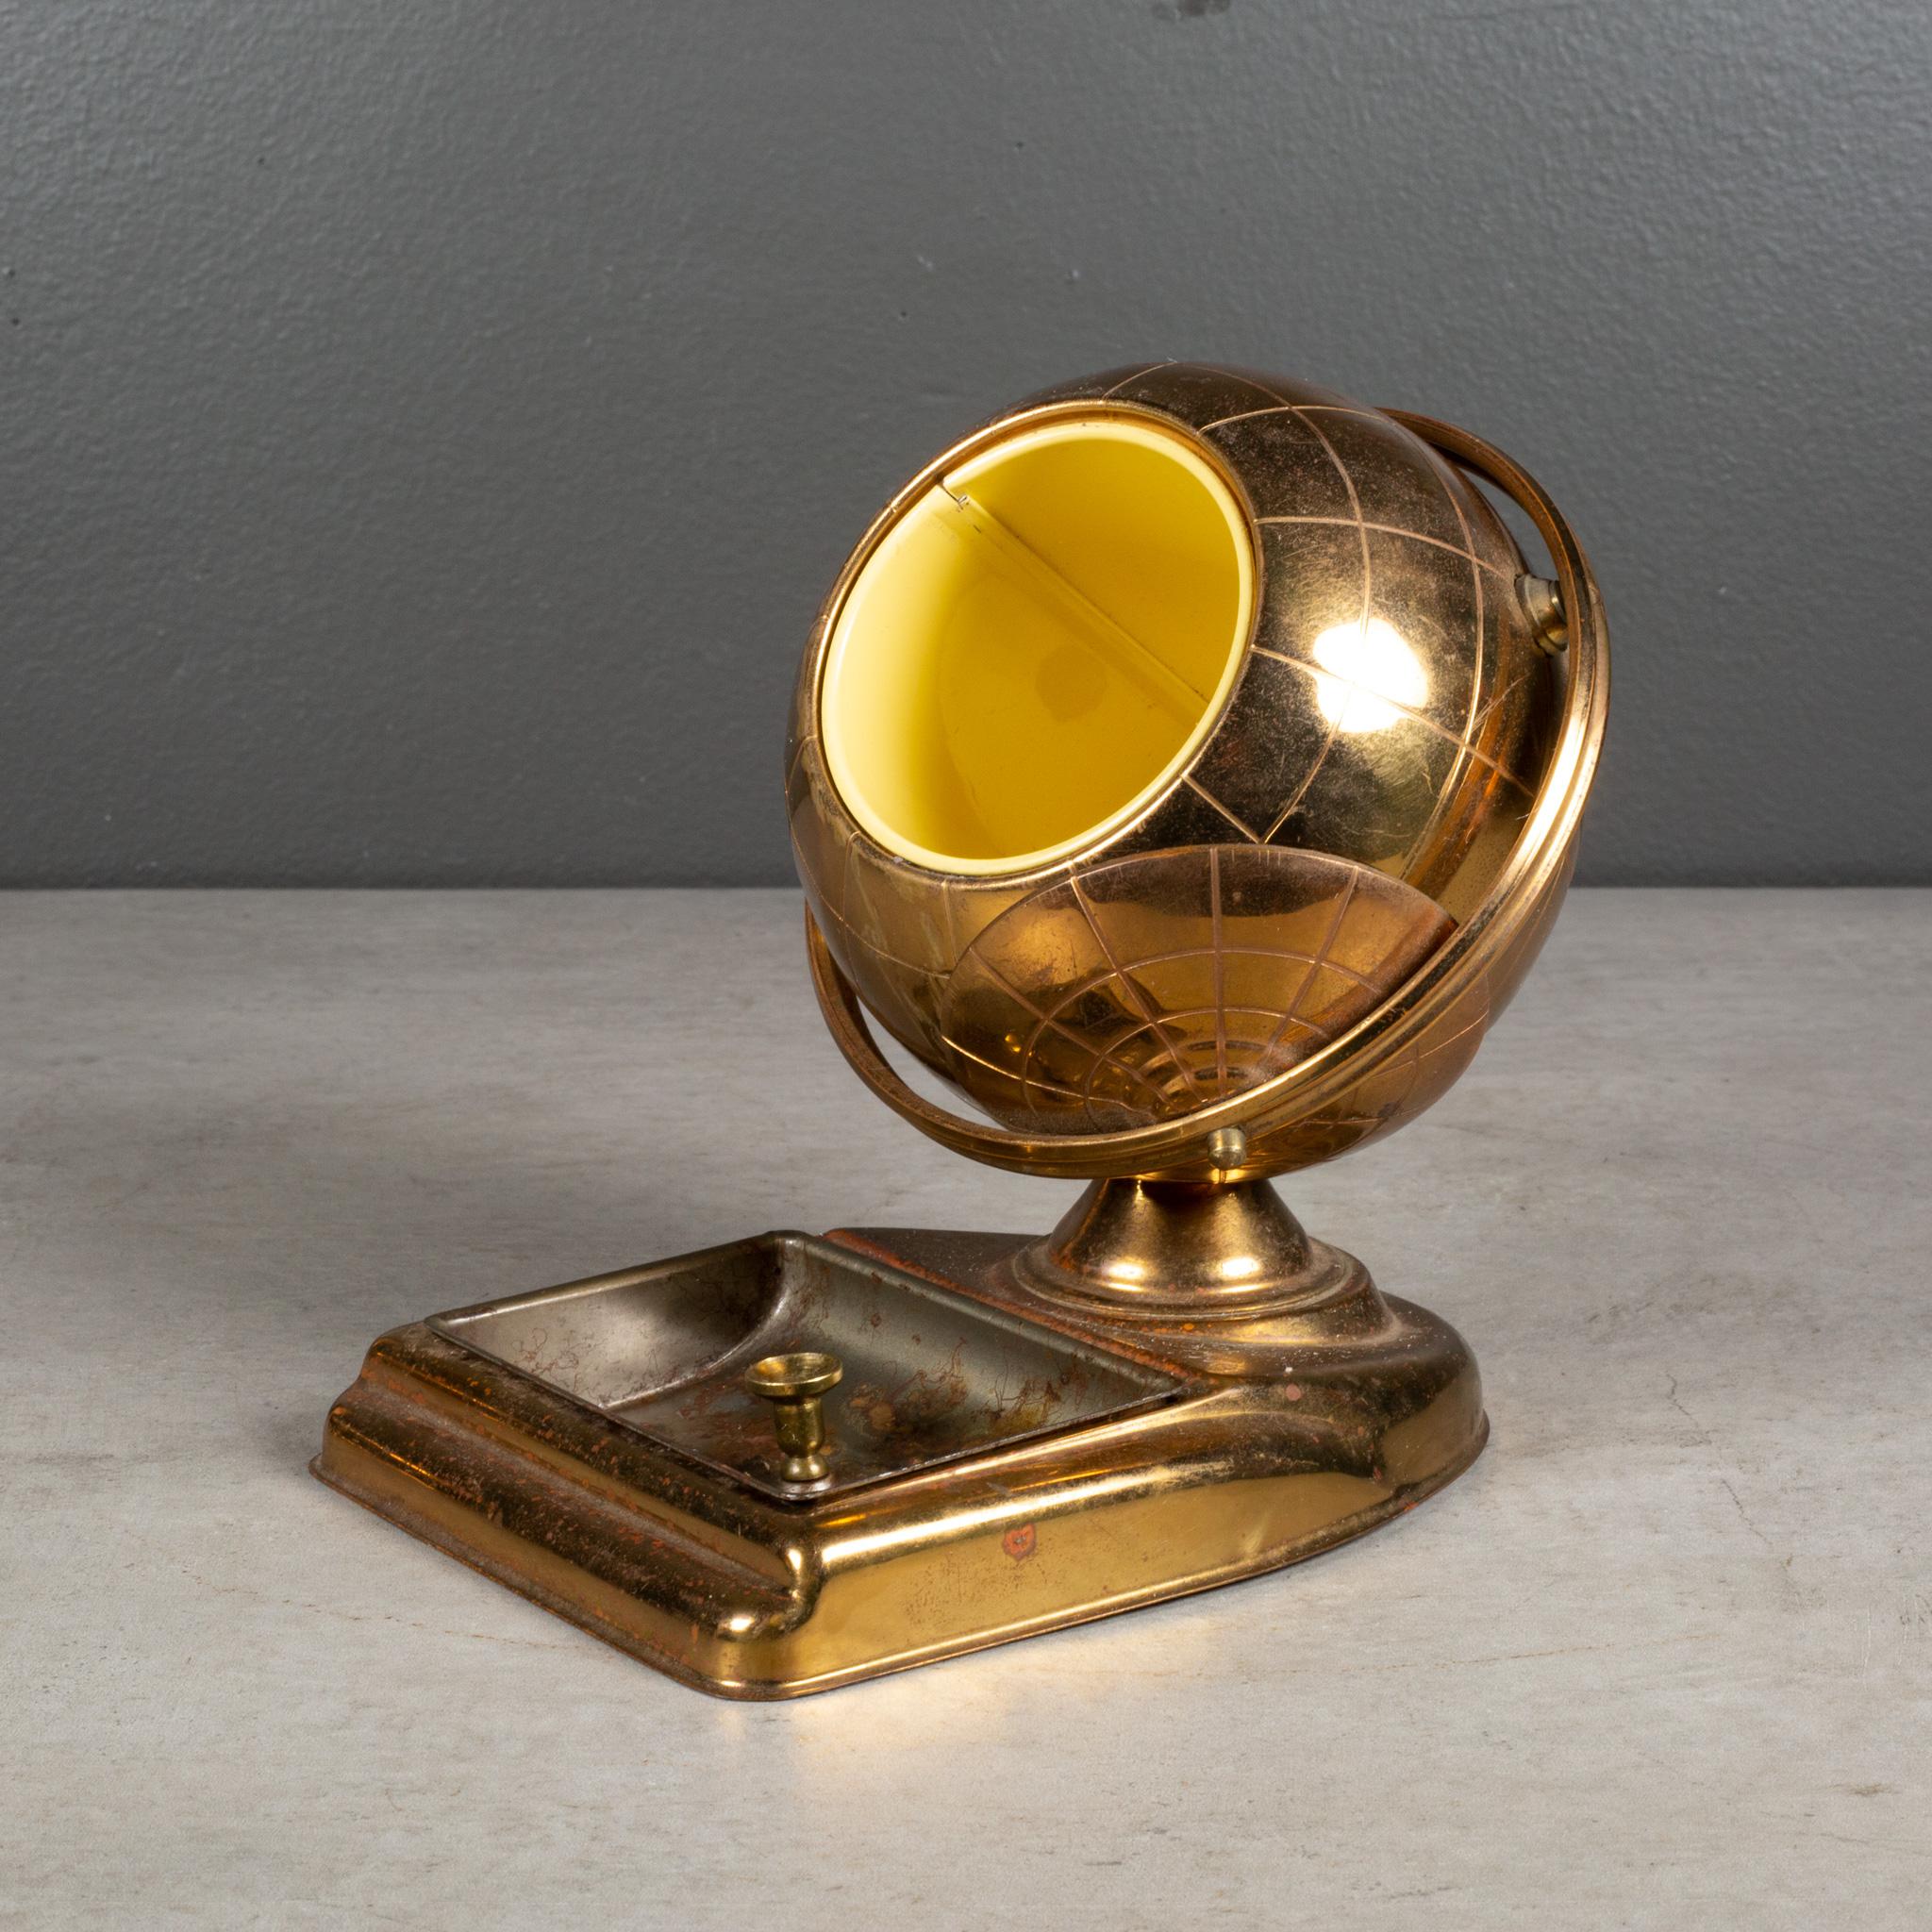 ABOUT

An original mid-century brass cigarette holder and ashtray or coin dish. The lid slides open on the globe's axis to reveal a metal interior designed to hold cigarettes. This globe is unique because it has an attached tray.

 CREATOR: